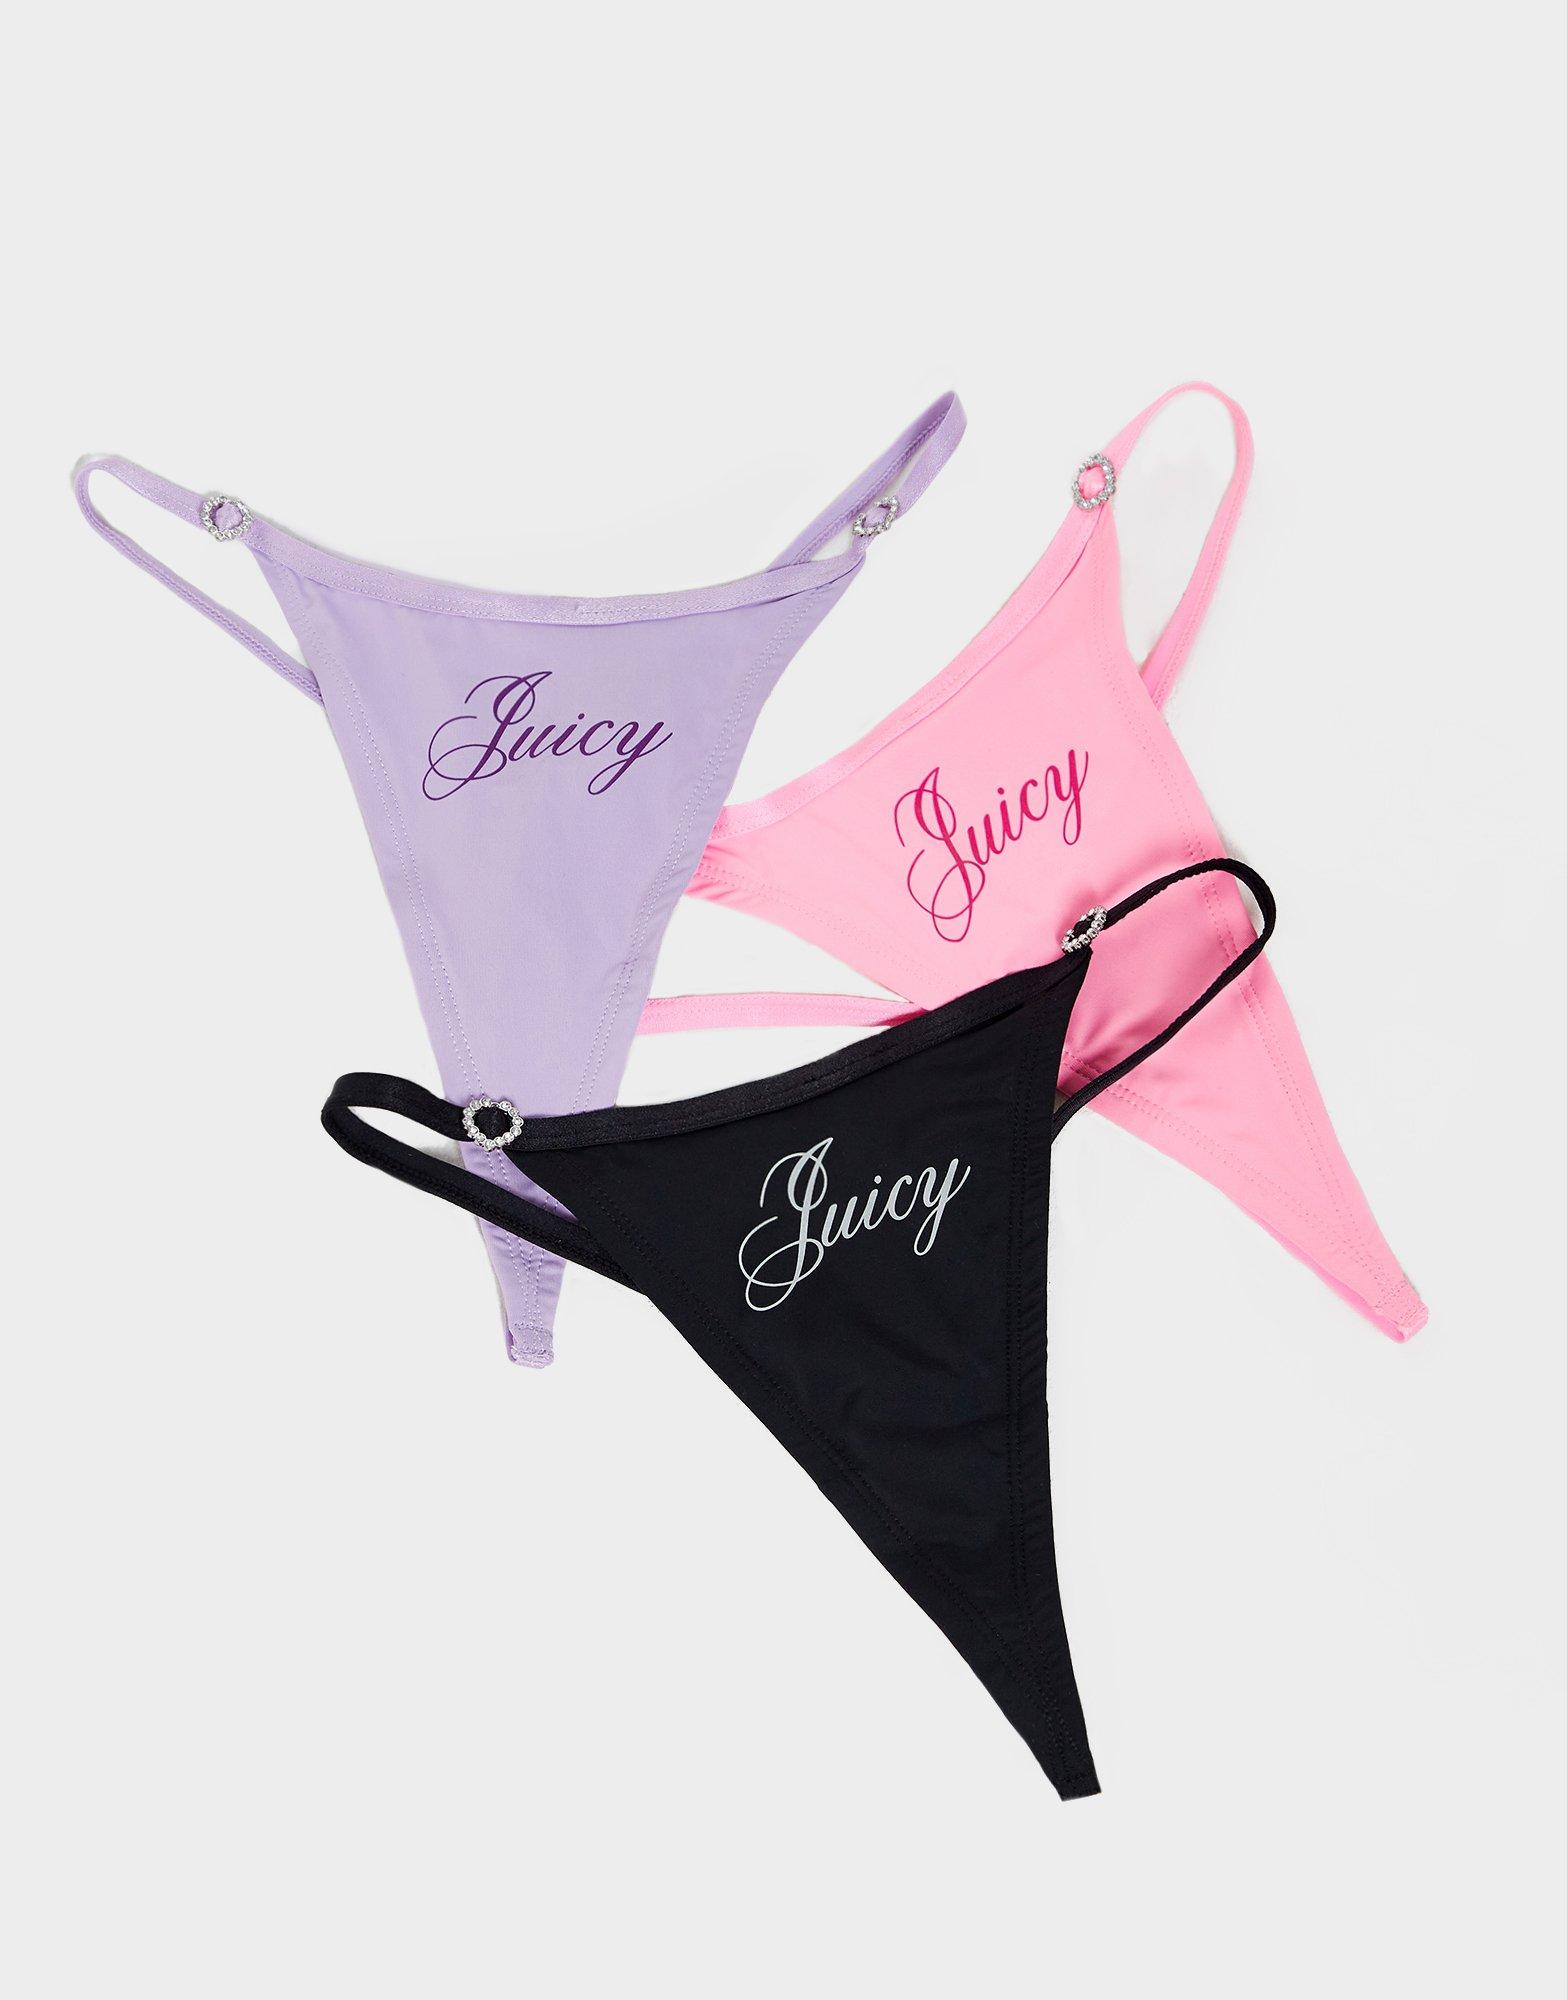 Juicy Couture mesh thong in blue tiger print - ShopStyle